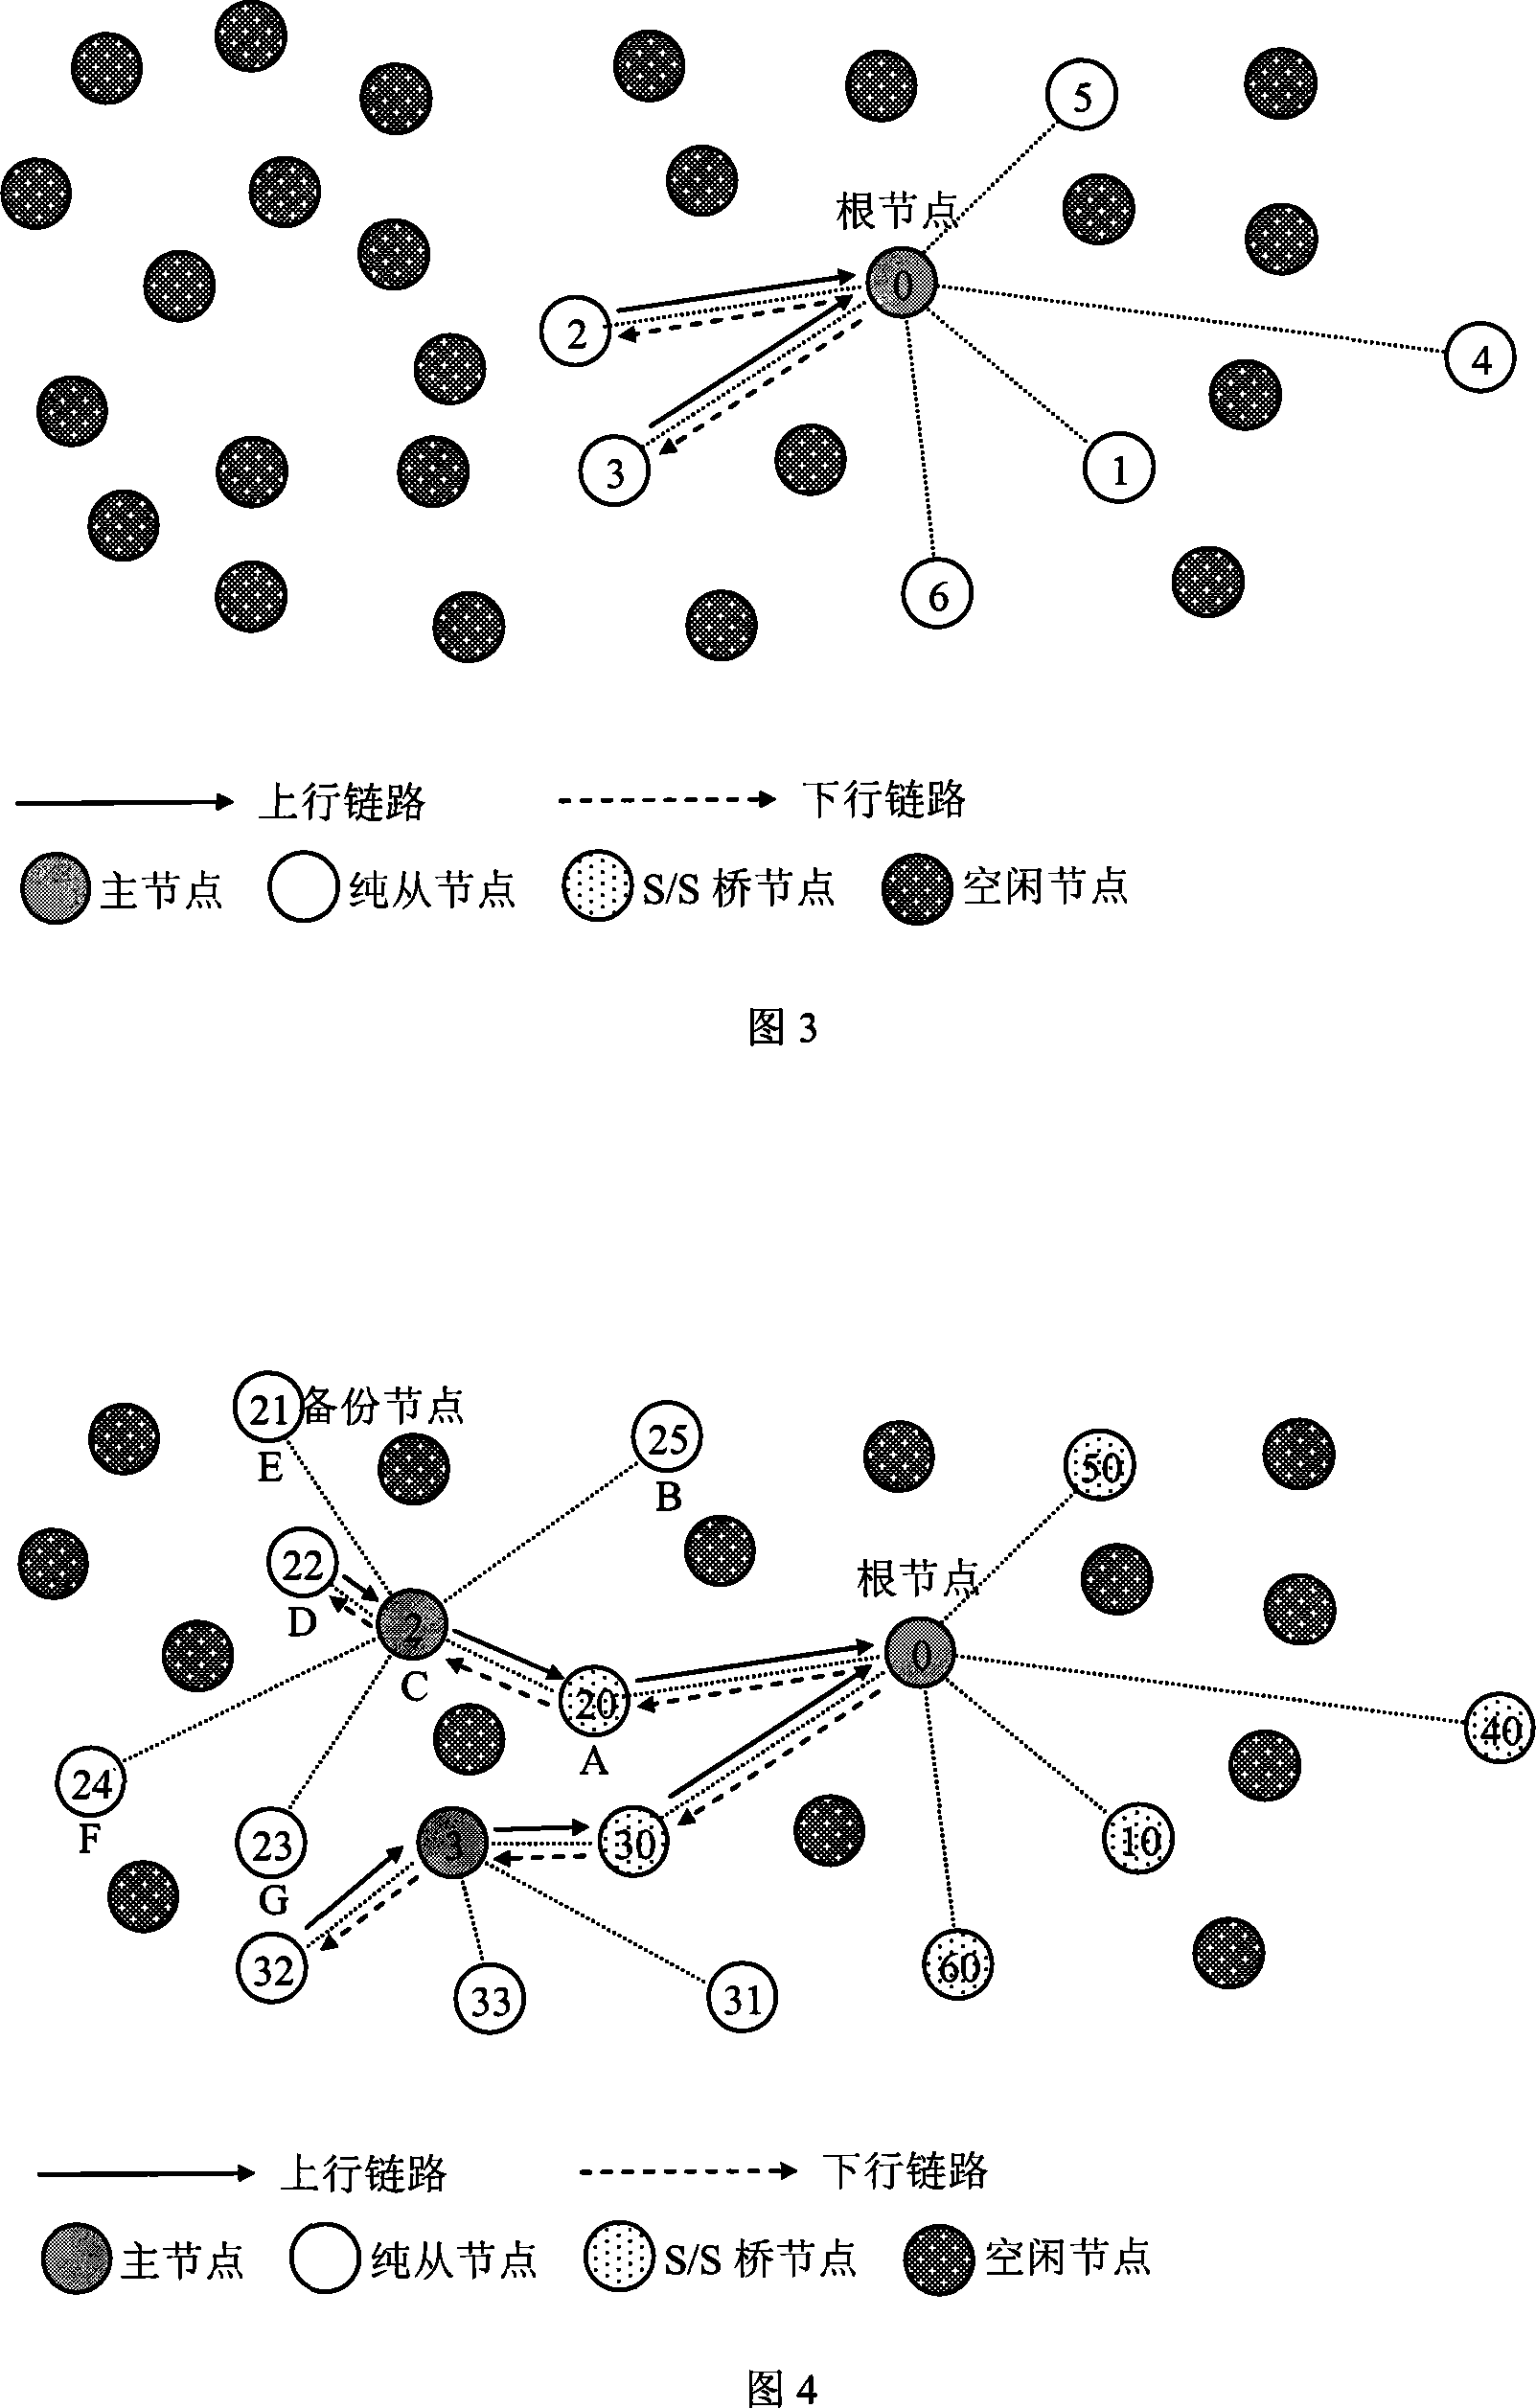 A Bluetooth wireless transducer network organizing and routing method